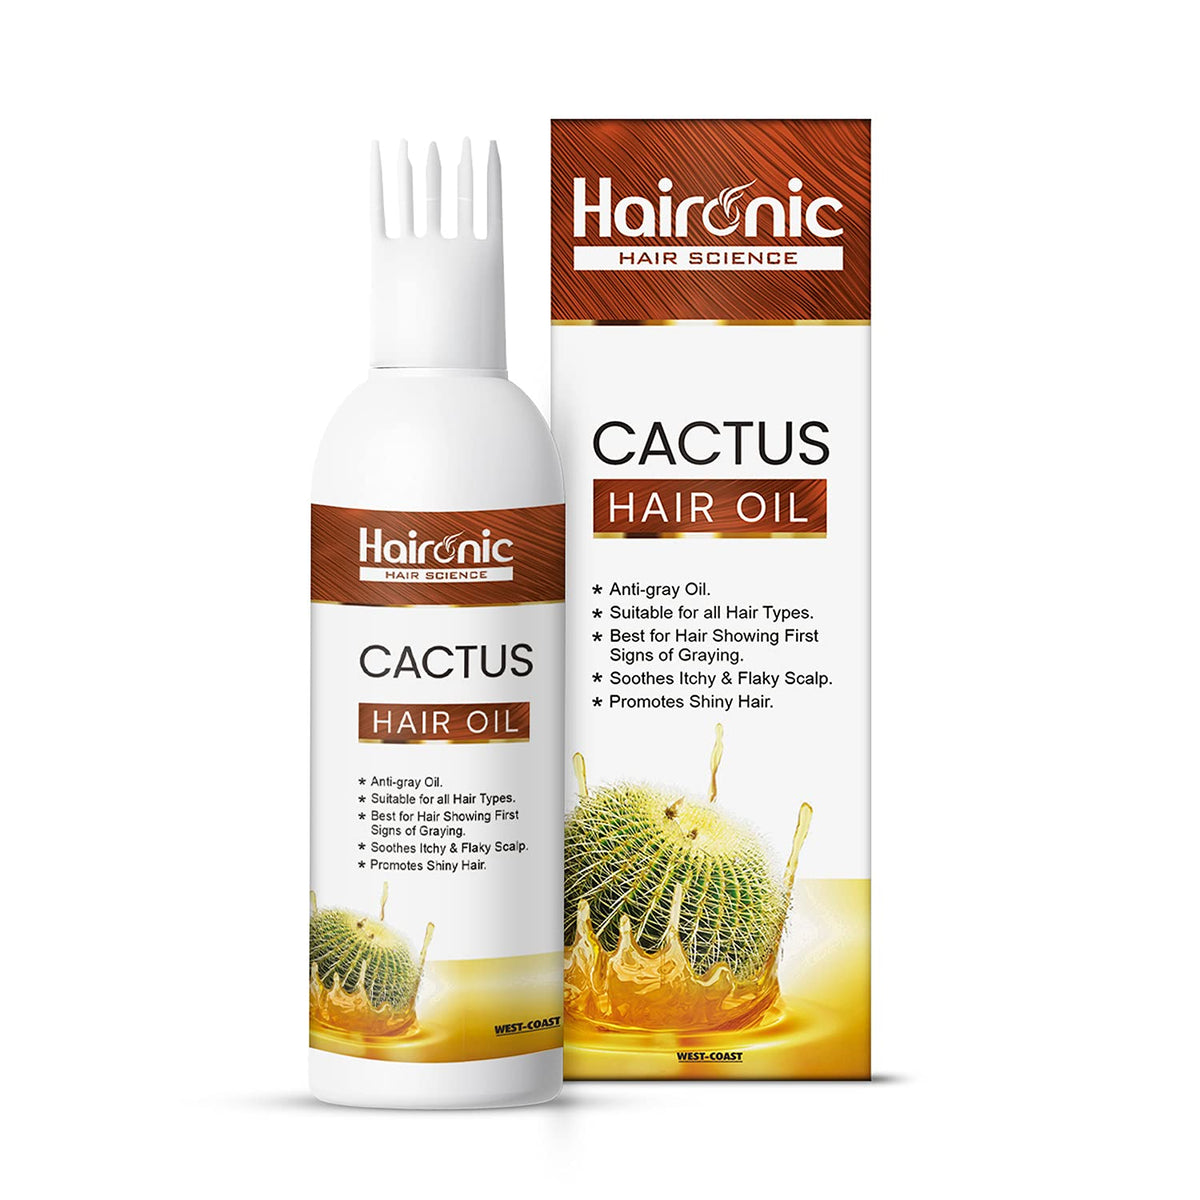 Haironic Hair Science Cactus Hair Oil | Promotes Shiny Hair |Non-Sticky & Suitable for All Hair Types – 100ml (Pack of 2)